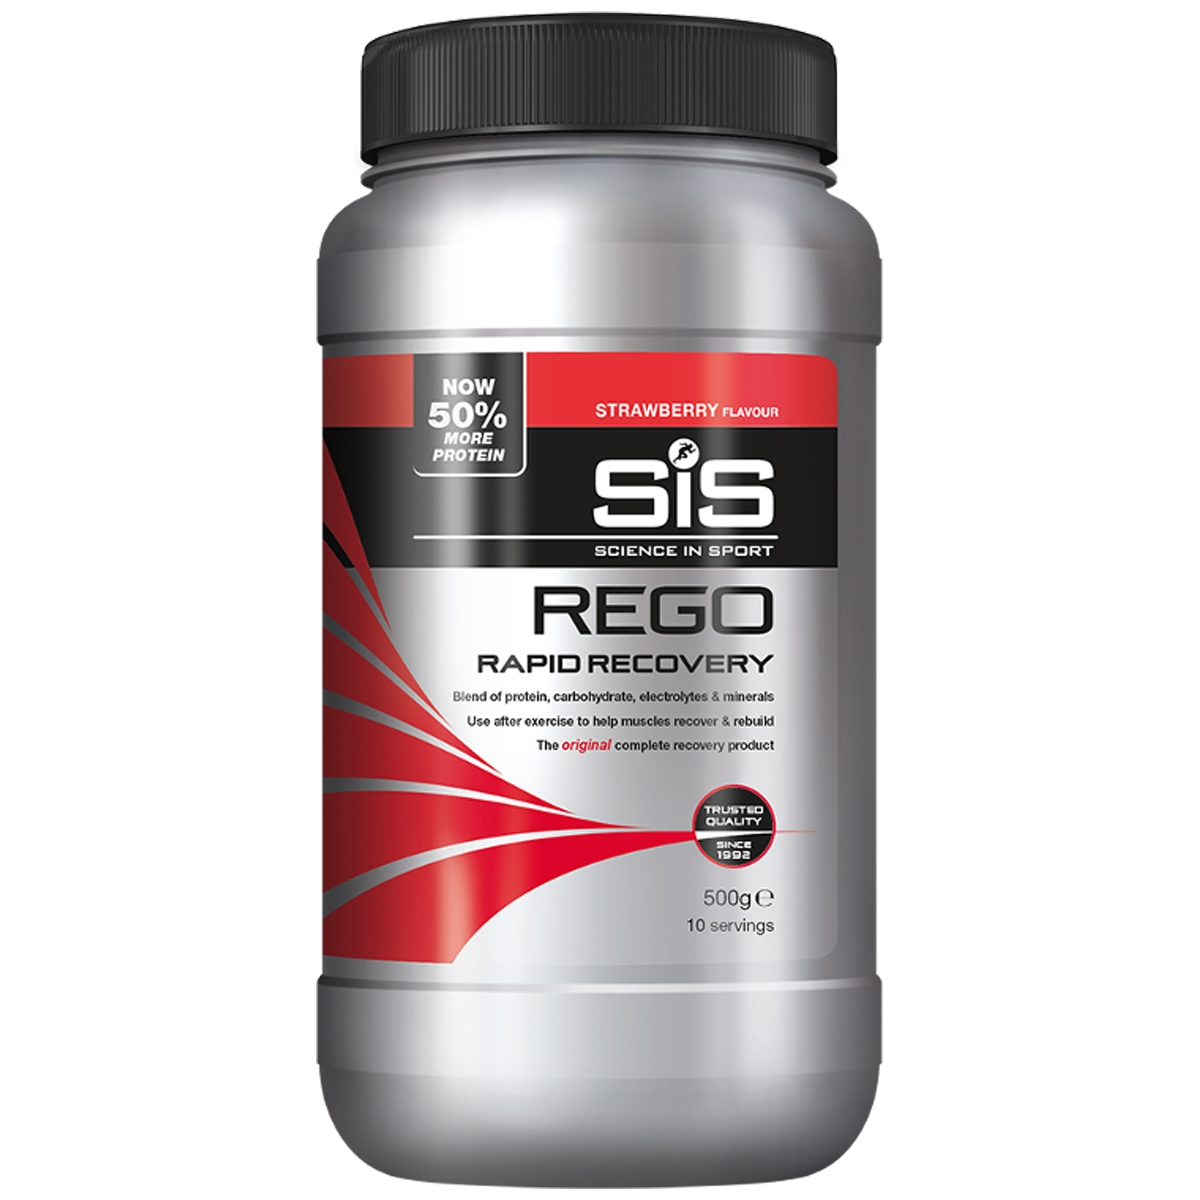 Rego Rapid Recovery Drink Strawberry Flavor 500g